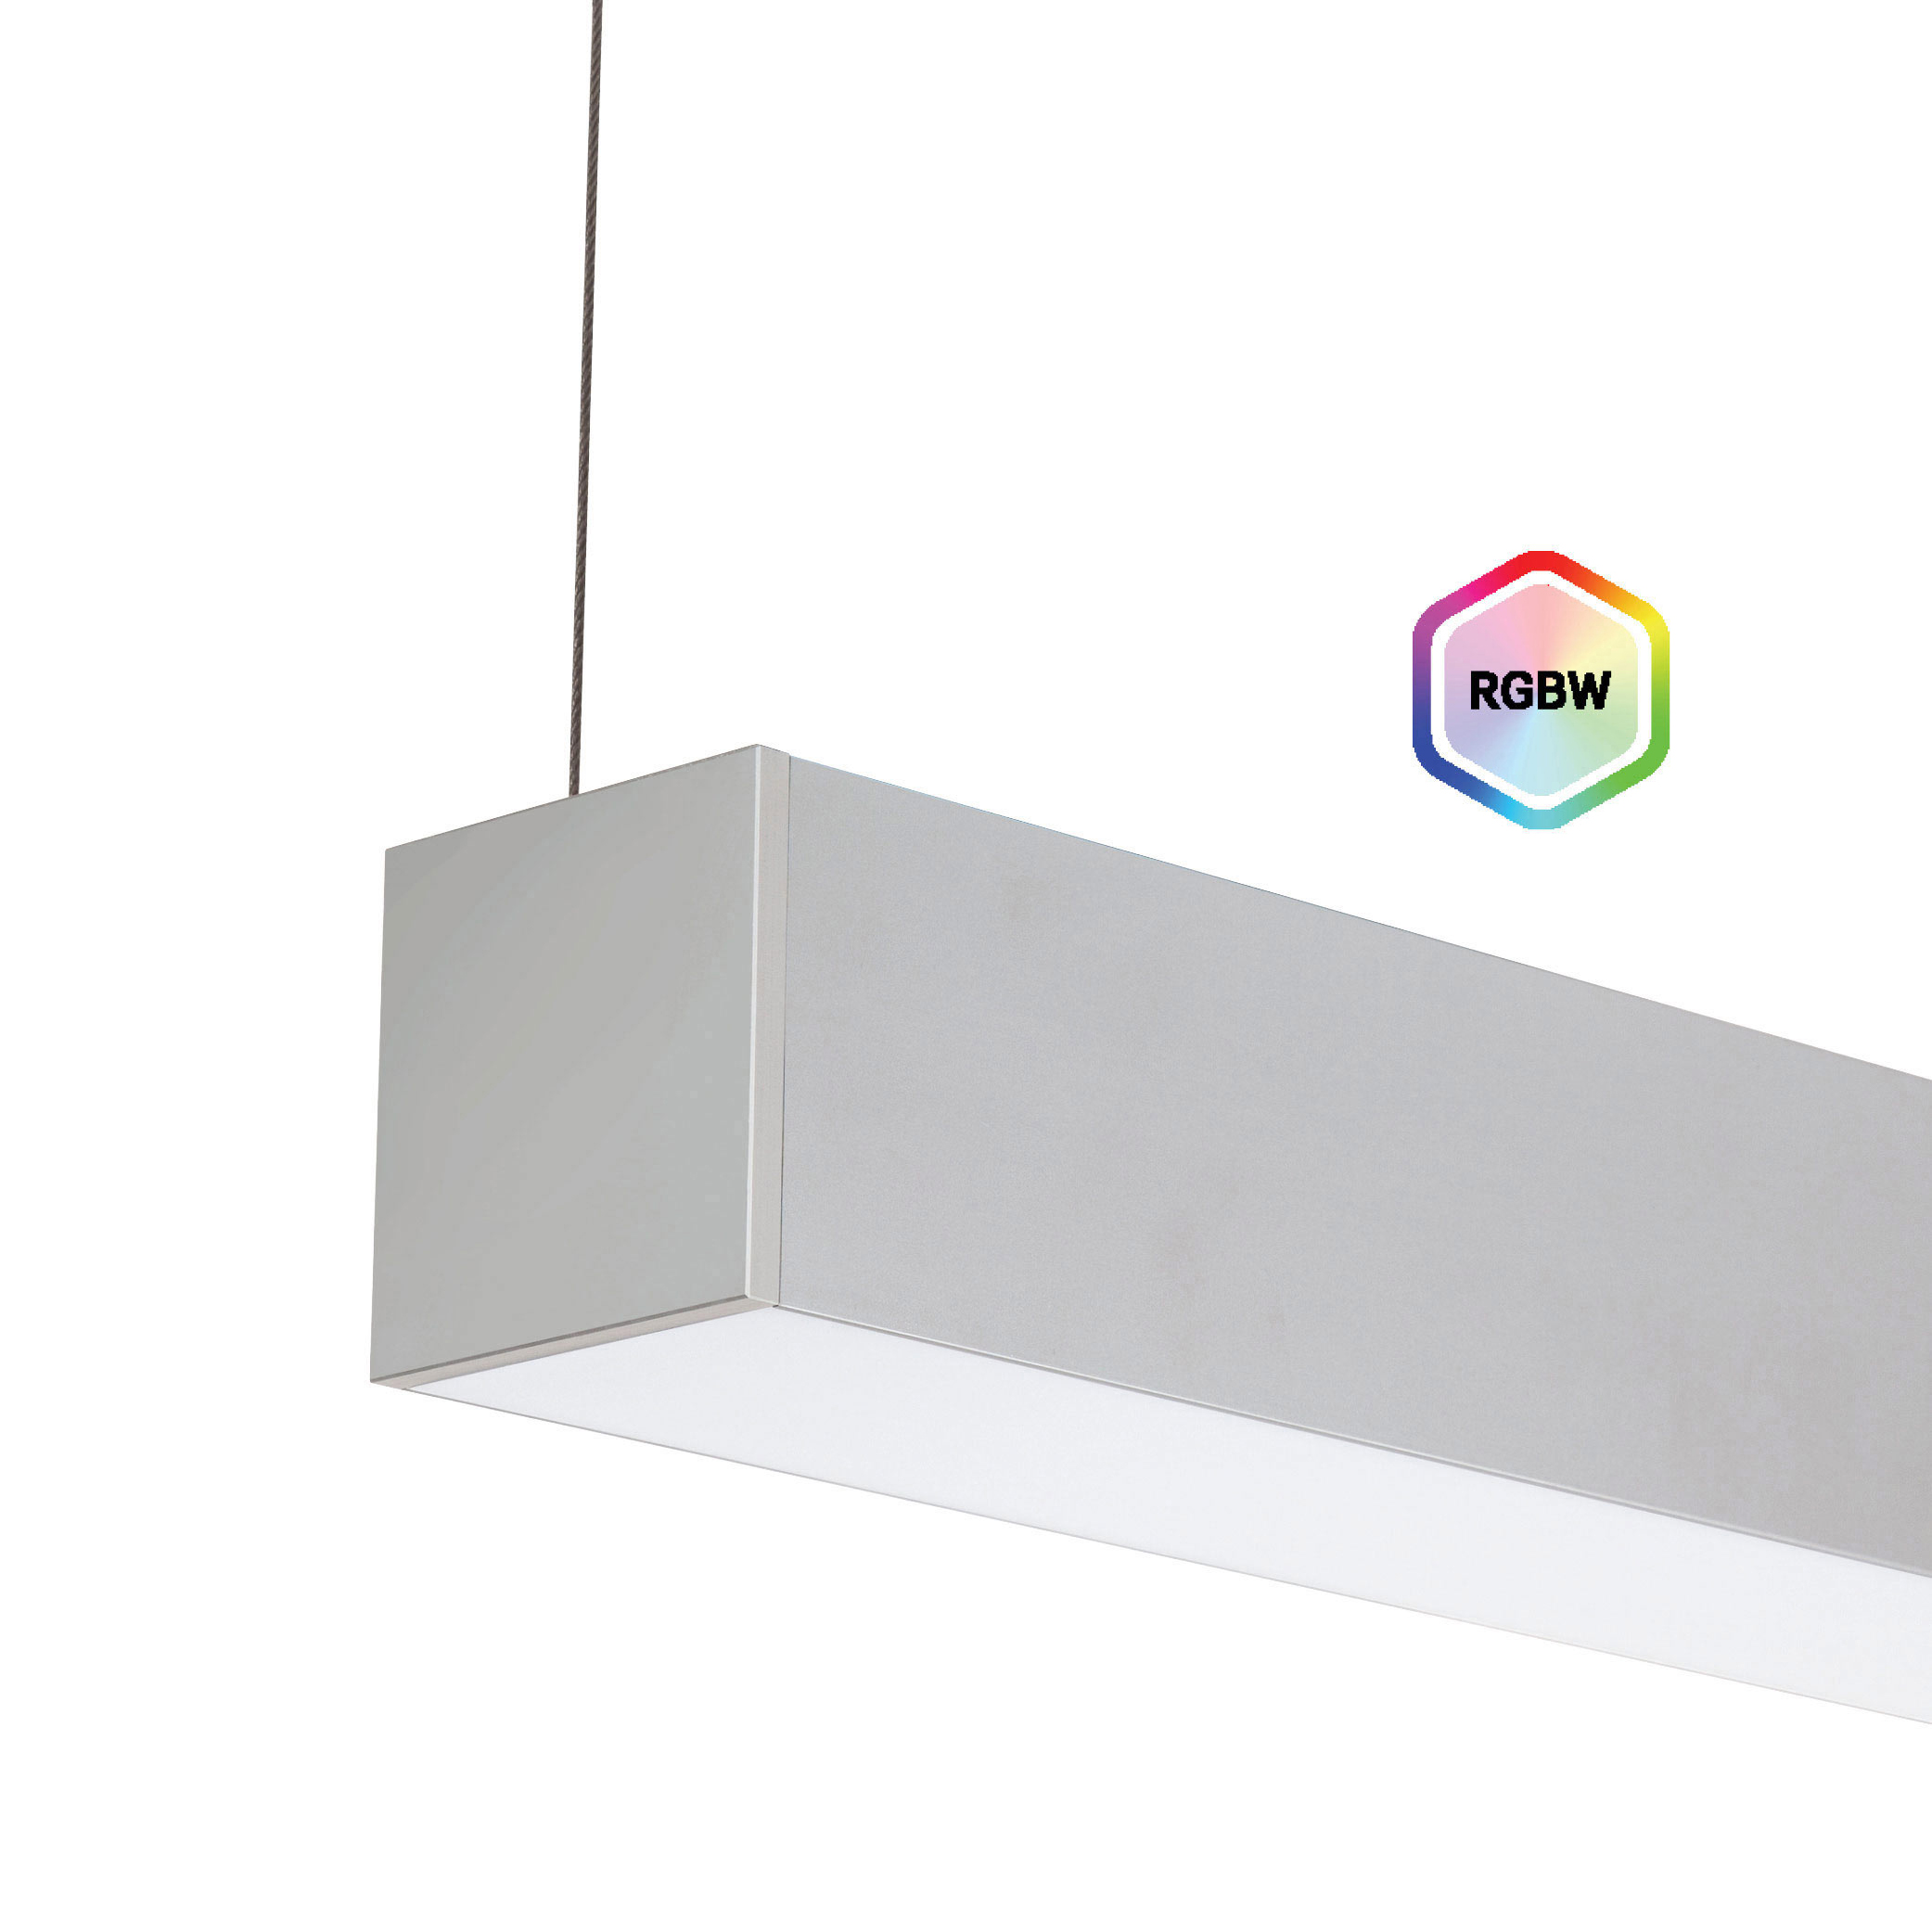 Birchwood Lighting Announces Launch of RGBW Capabilities in Kelsey and Jake 325 Luminaires